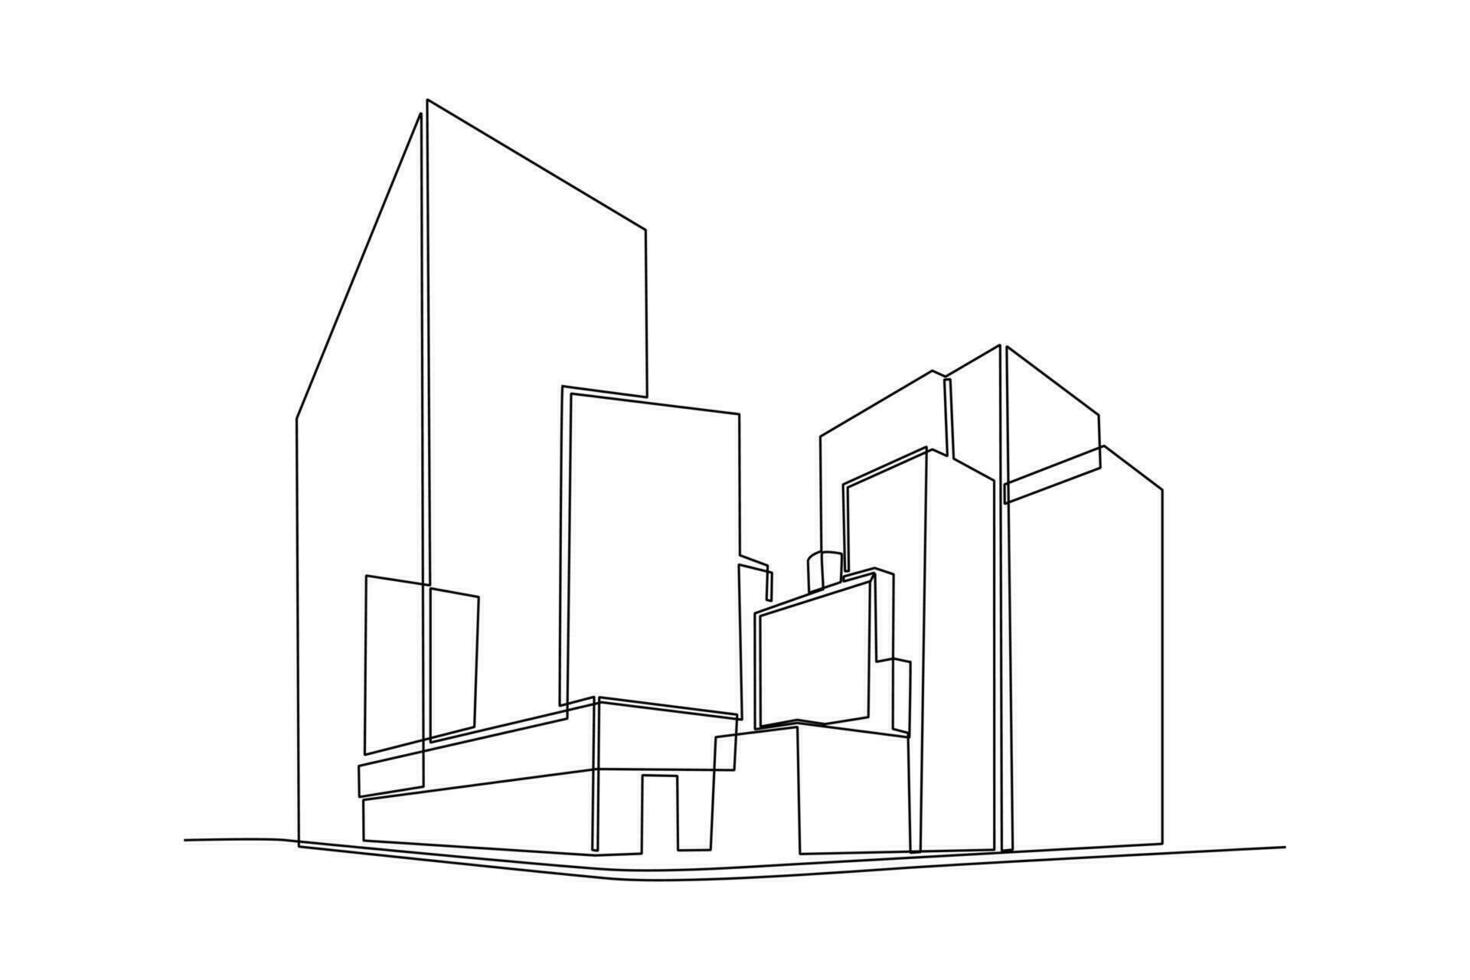 Single one line drawing Modern City Skyline. City concept. Continuous line draw design graphic vector illustration.